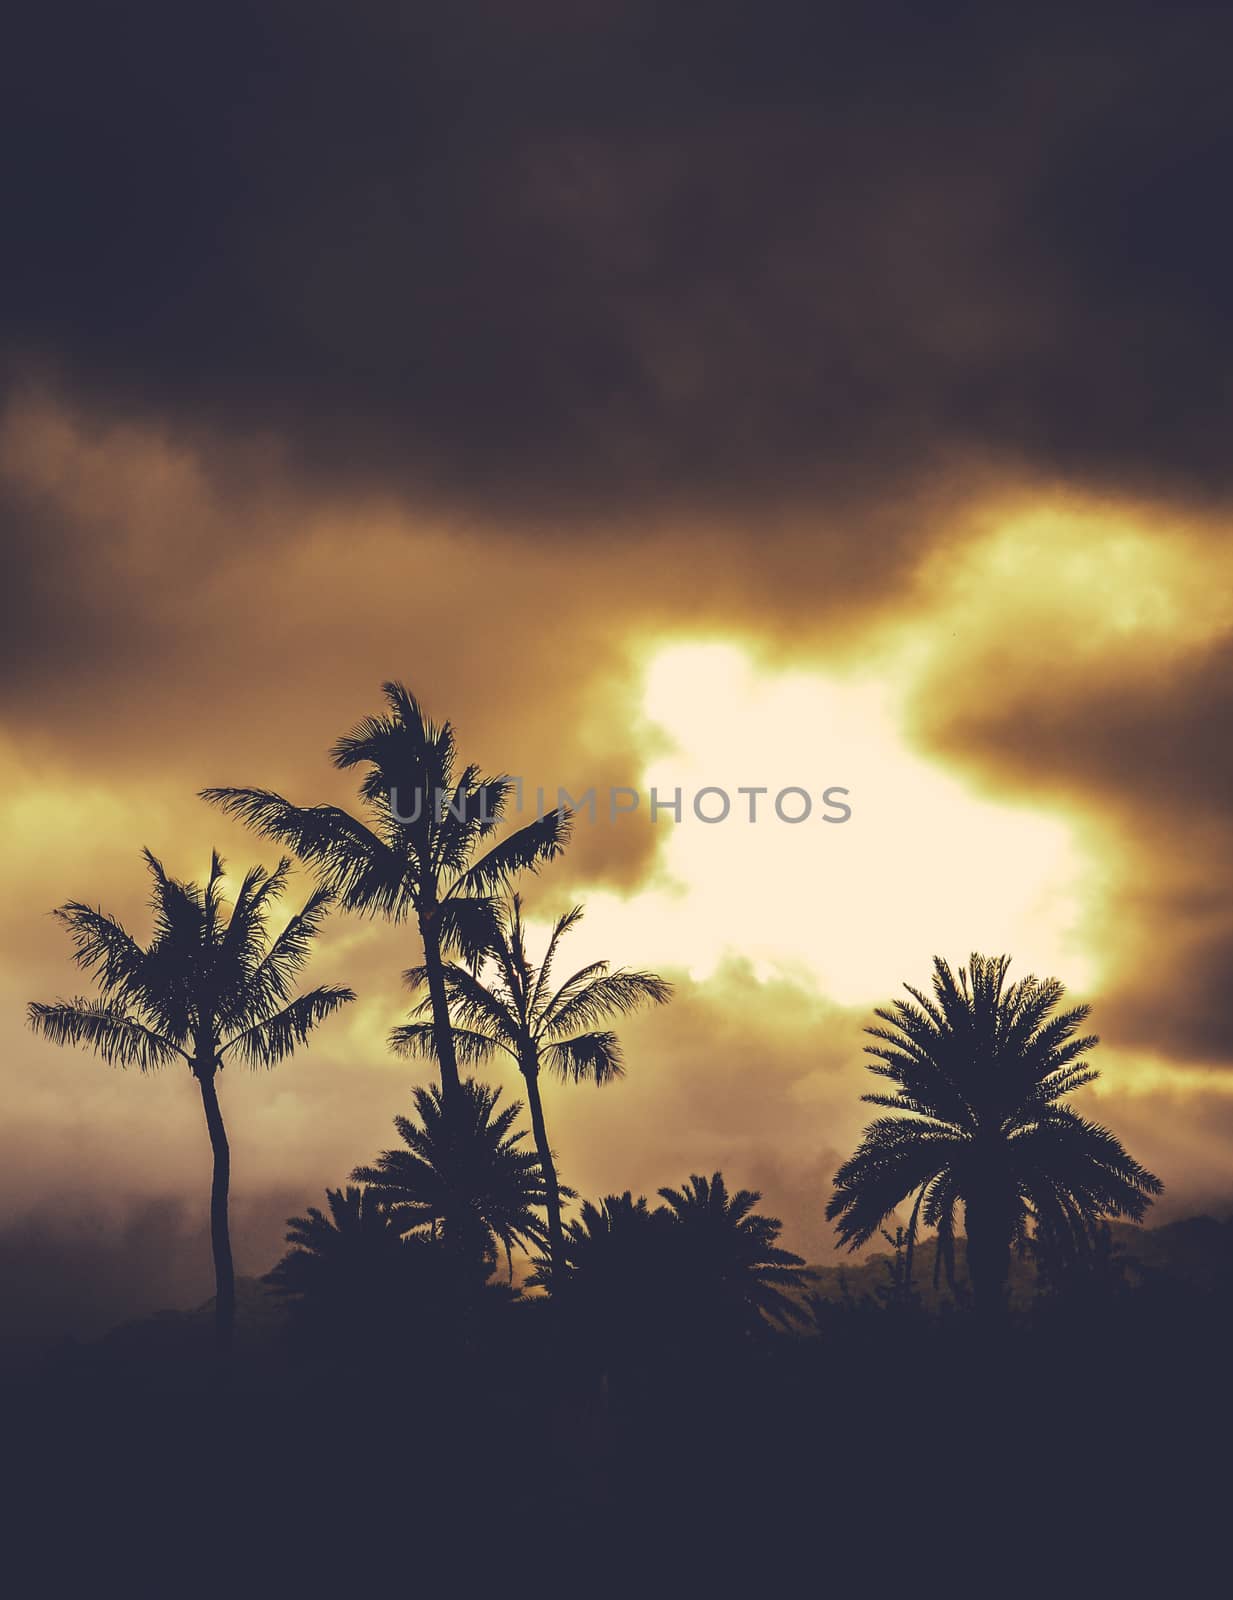 Retro Style Image Of Hawaii Palm Trees At Sunset With Copy Space